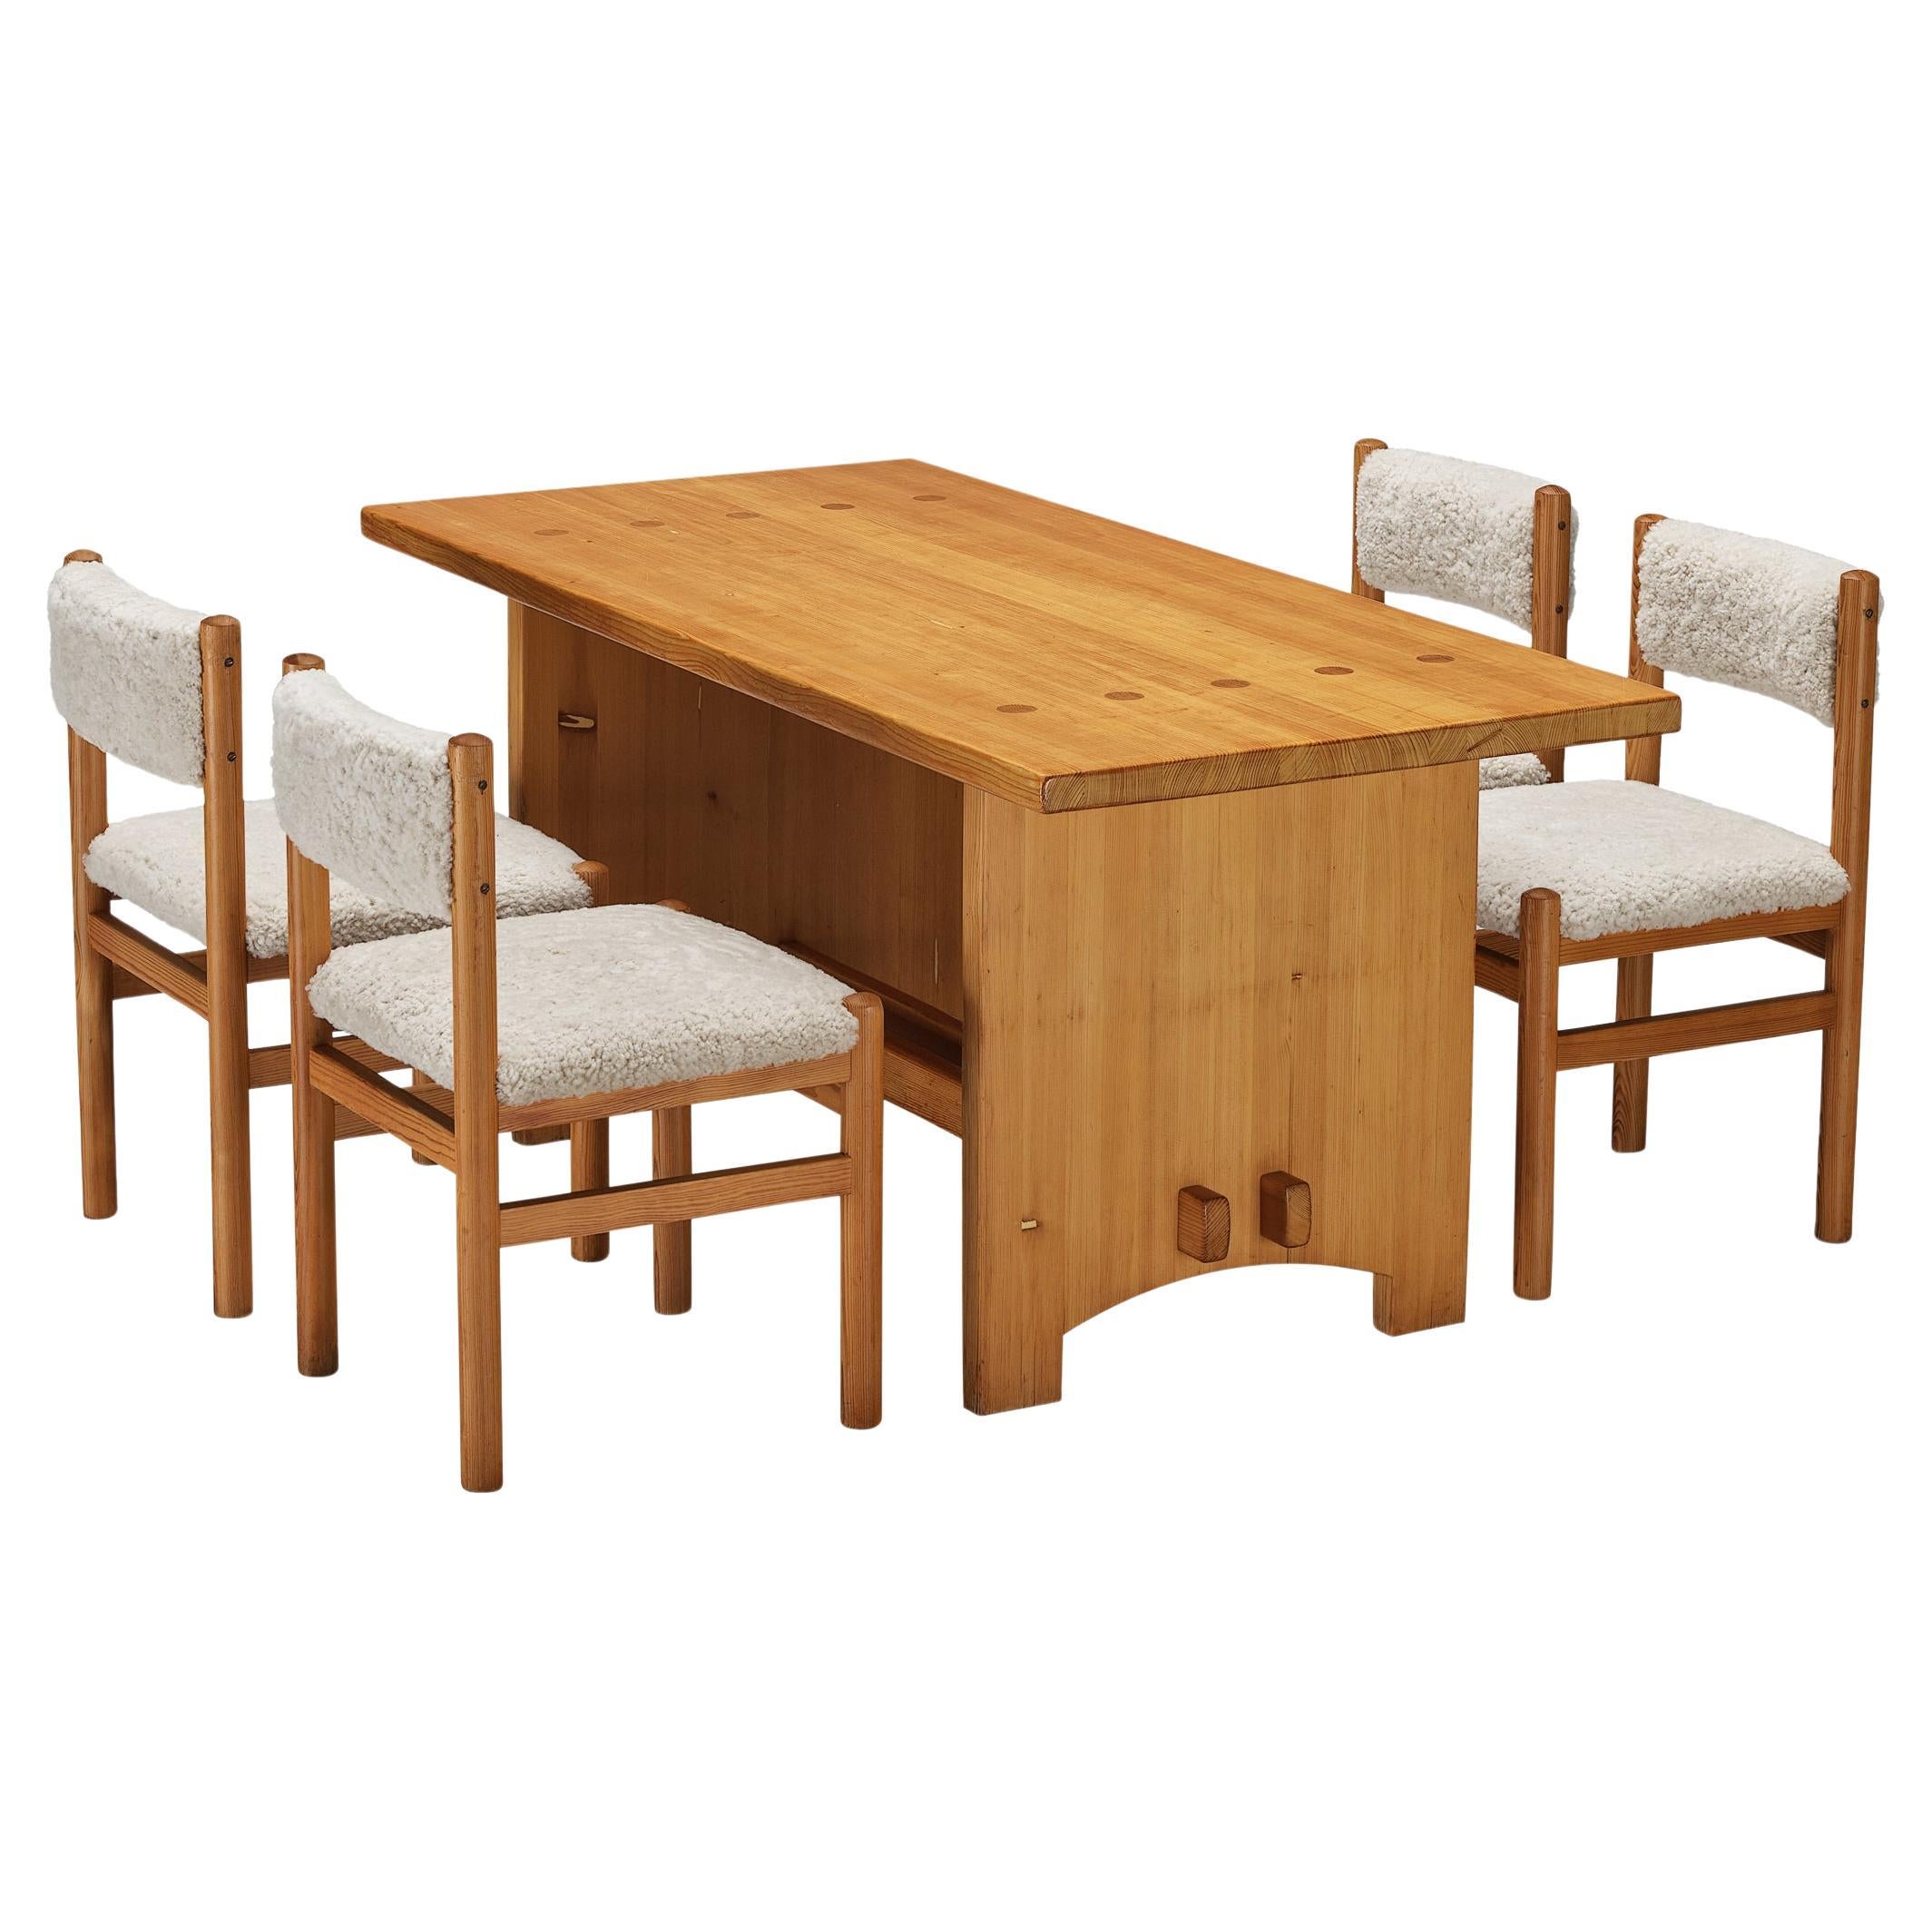 Dining Room Set With Jacob Kielland-Brandt Table and Chairs in Sheepskin 